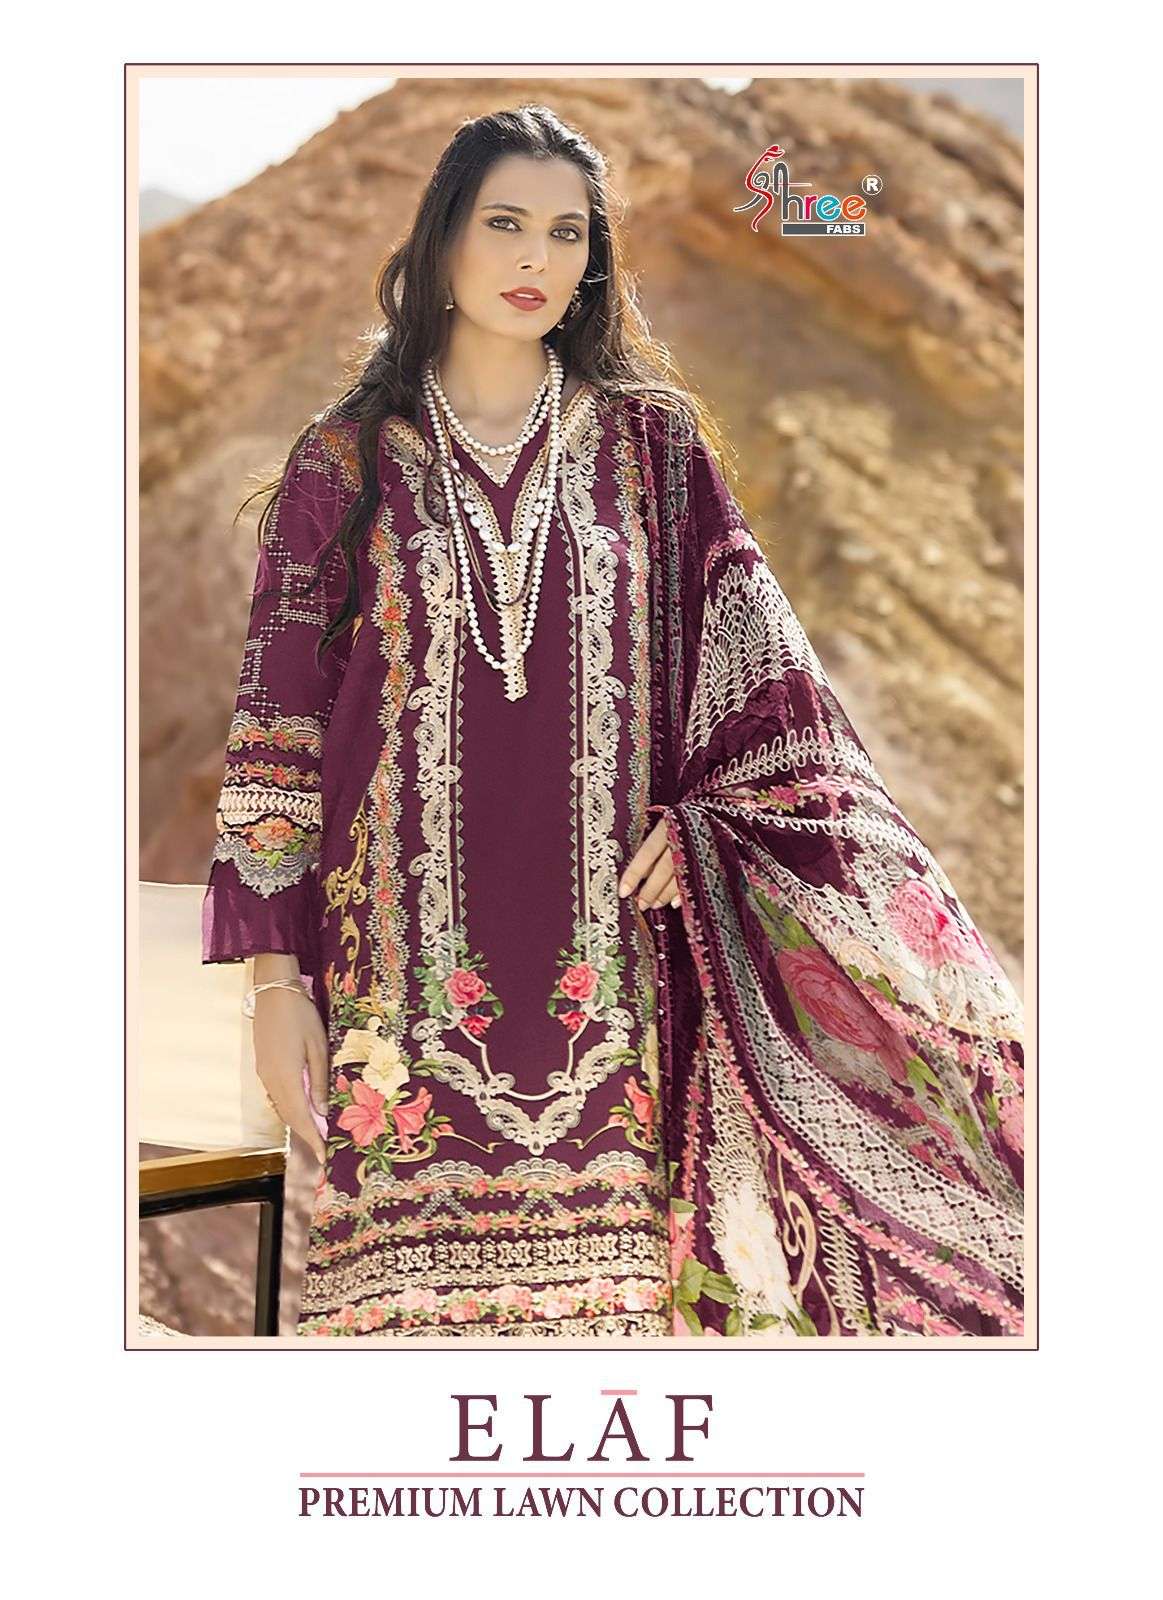 Shree fabs ELAF PREMIUM LAWN COLLECTION Cotton with Embroide...